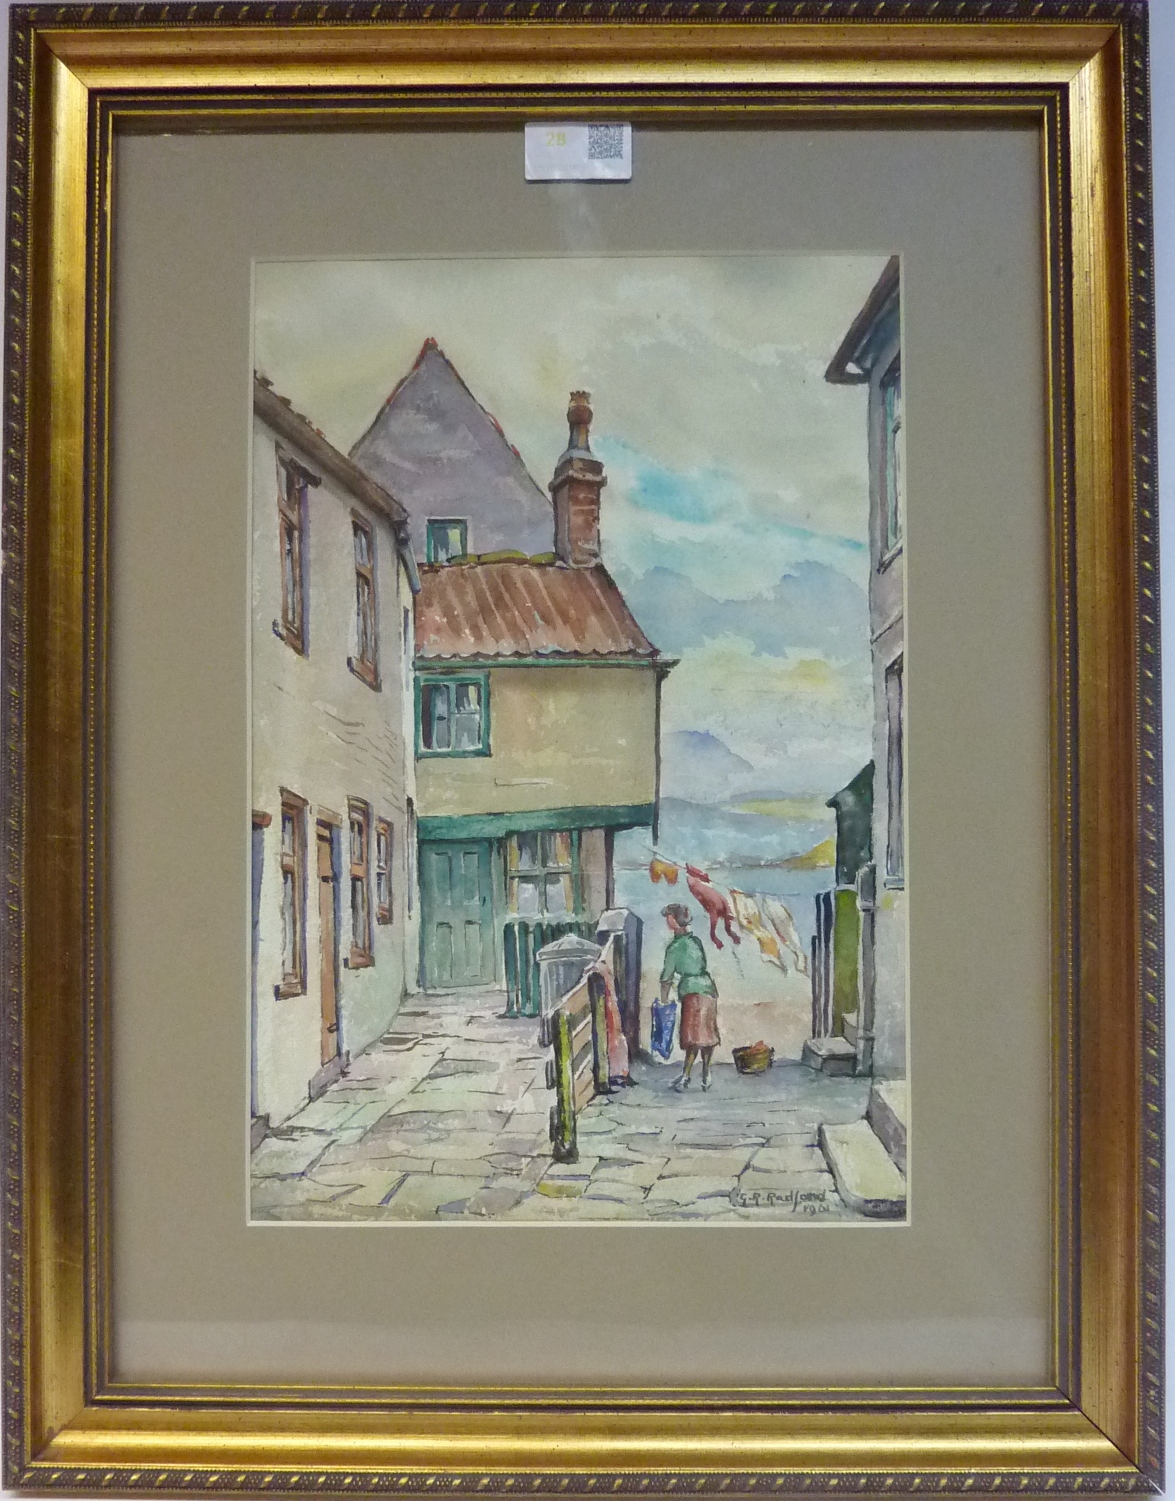 Tin Ghaut Whitby, watercolour signed and dated G R Radford 1961, 34.